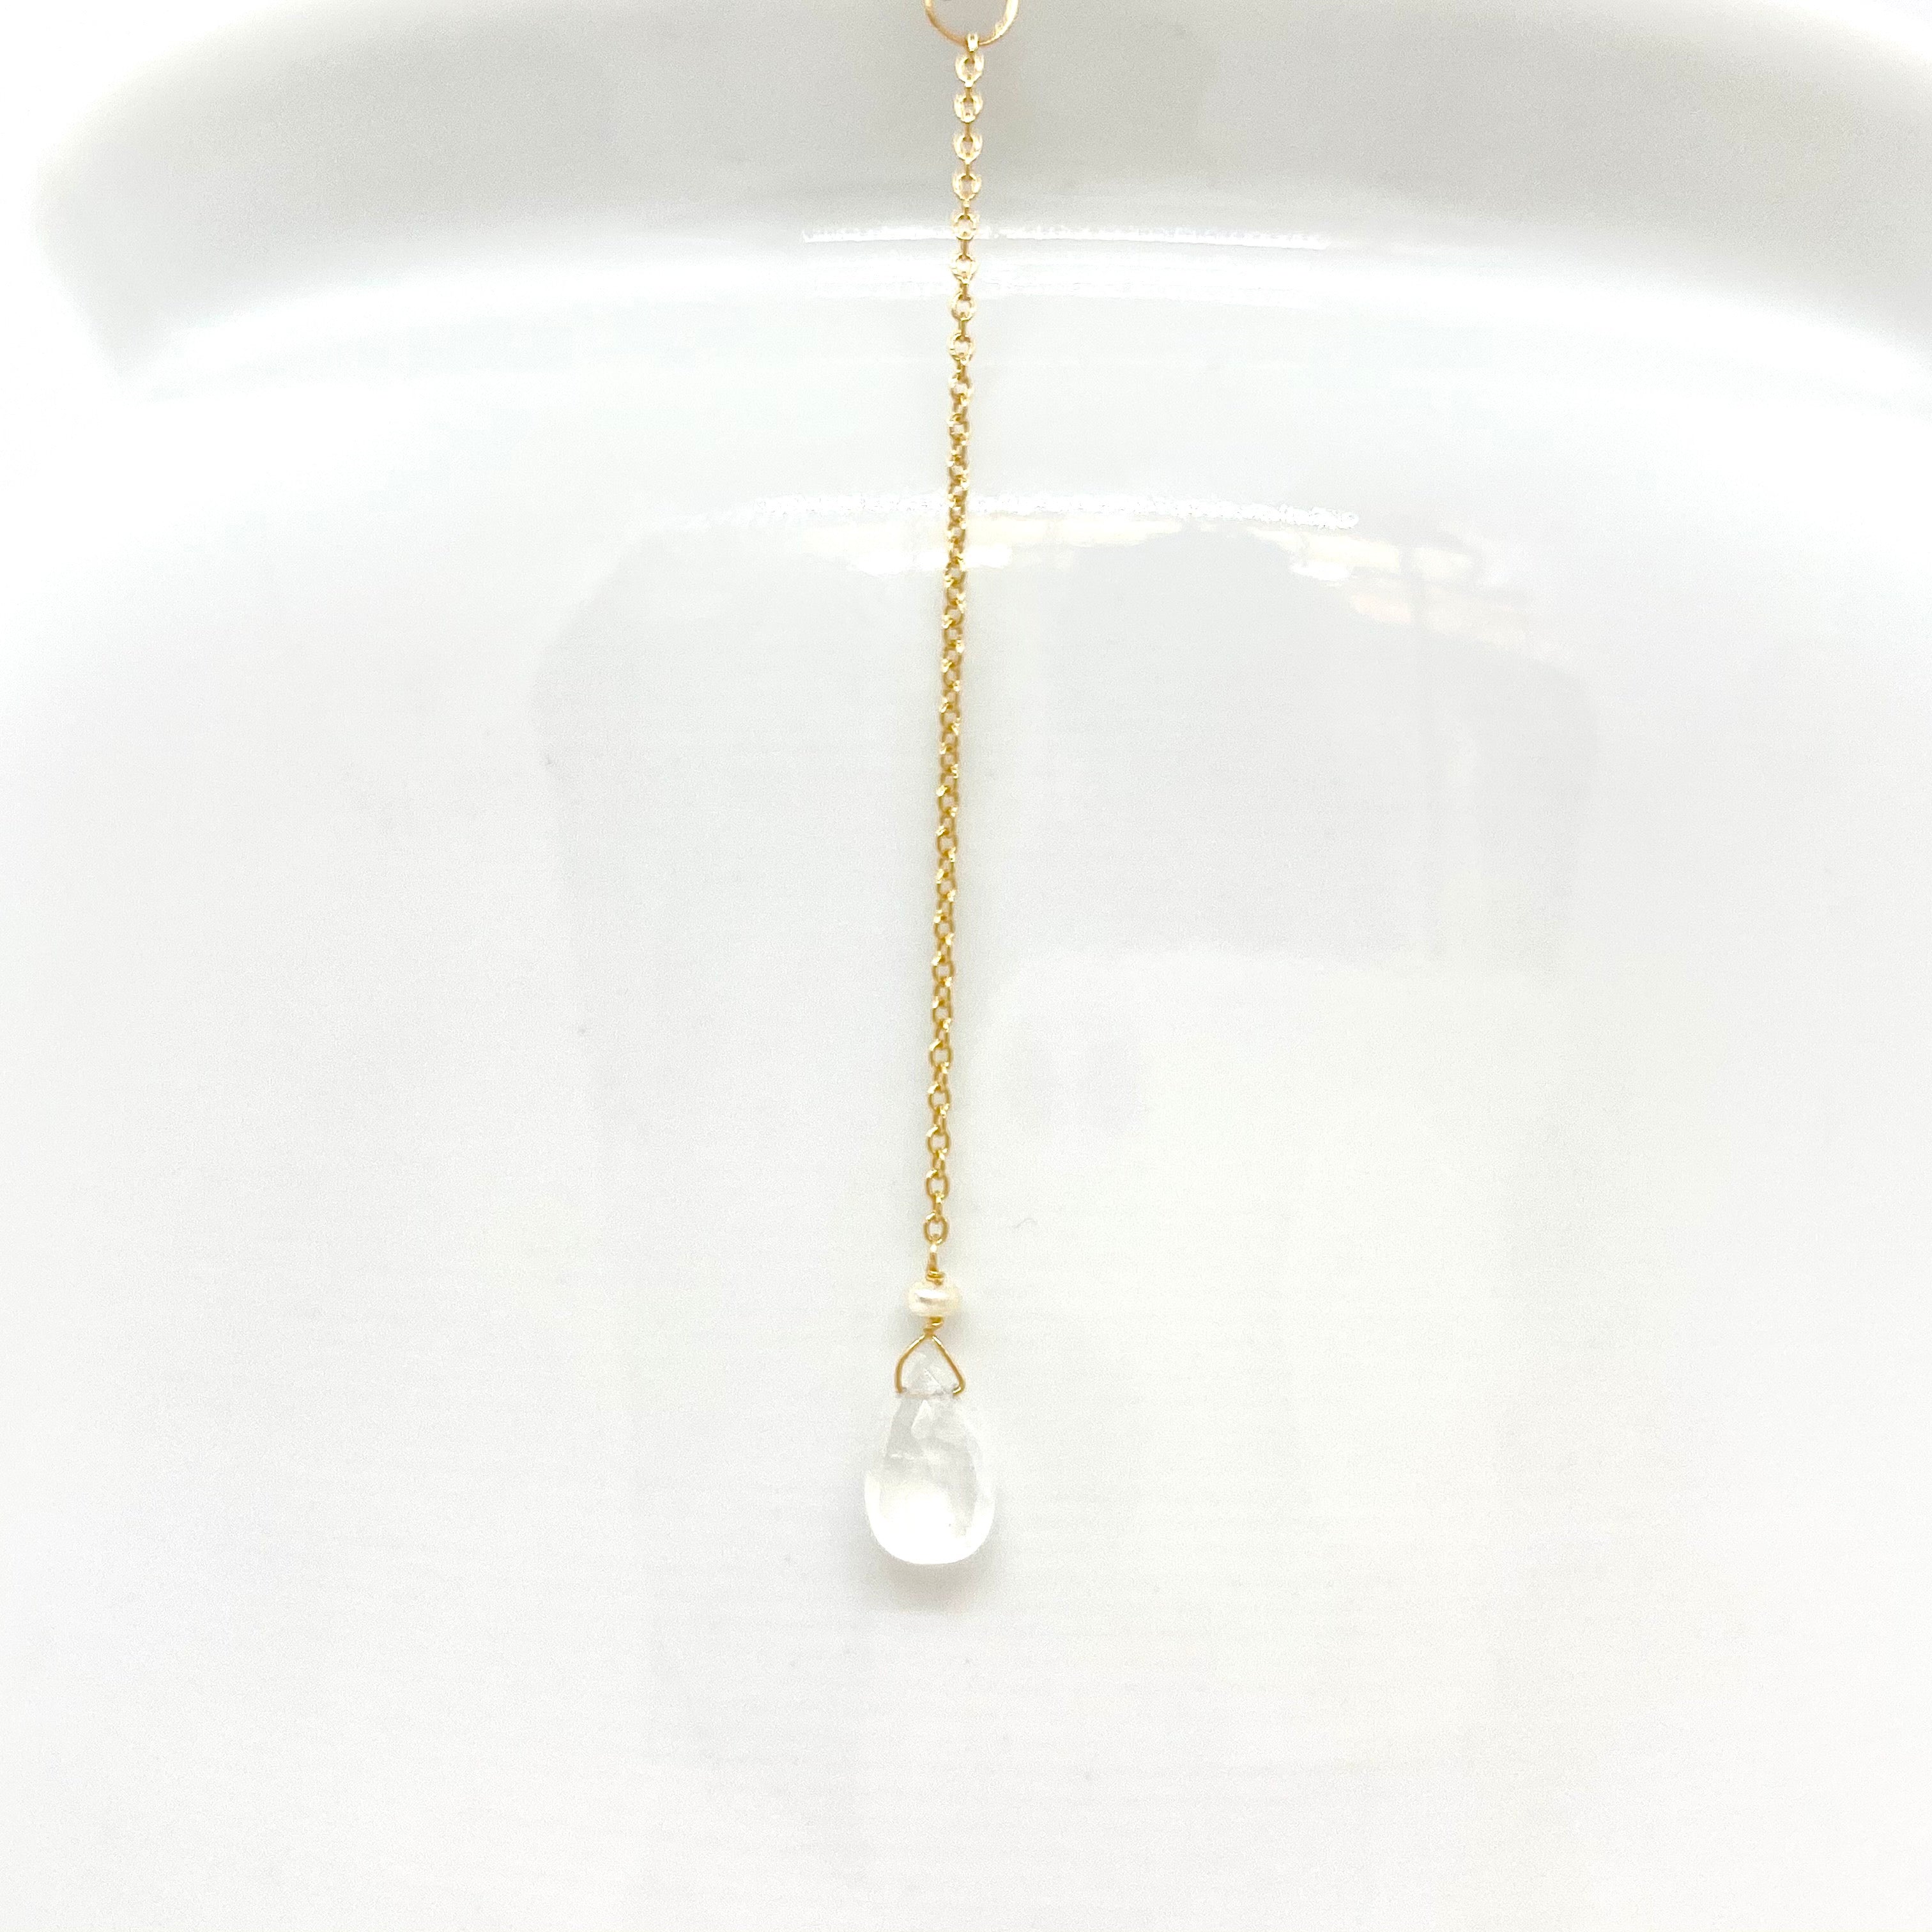 14k Gold Chain Necklace w/ White Opal, 18k Gold Drop, 18k Gold Nugget & Freshwater Pearls